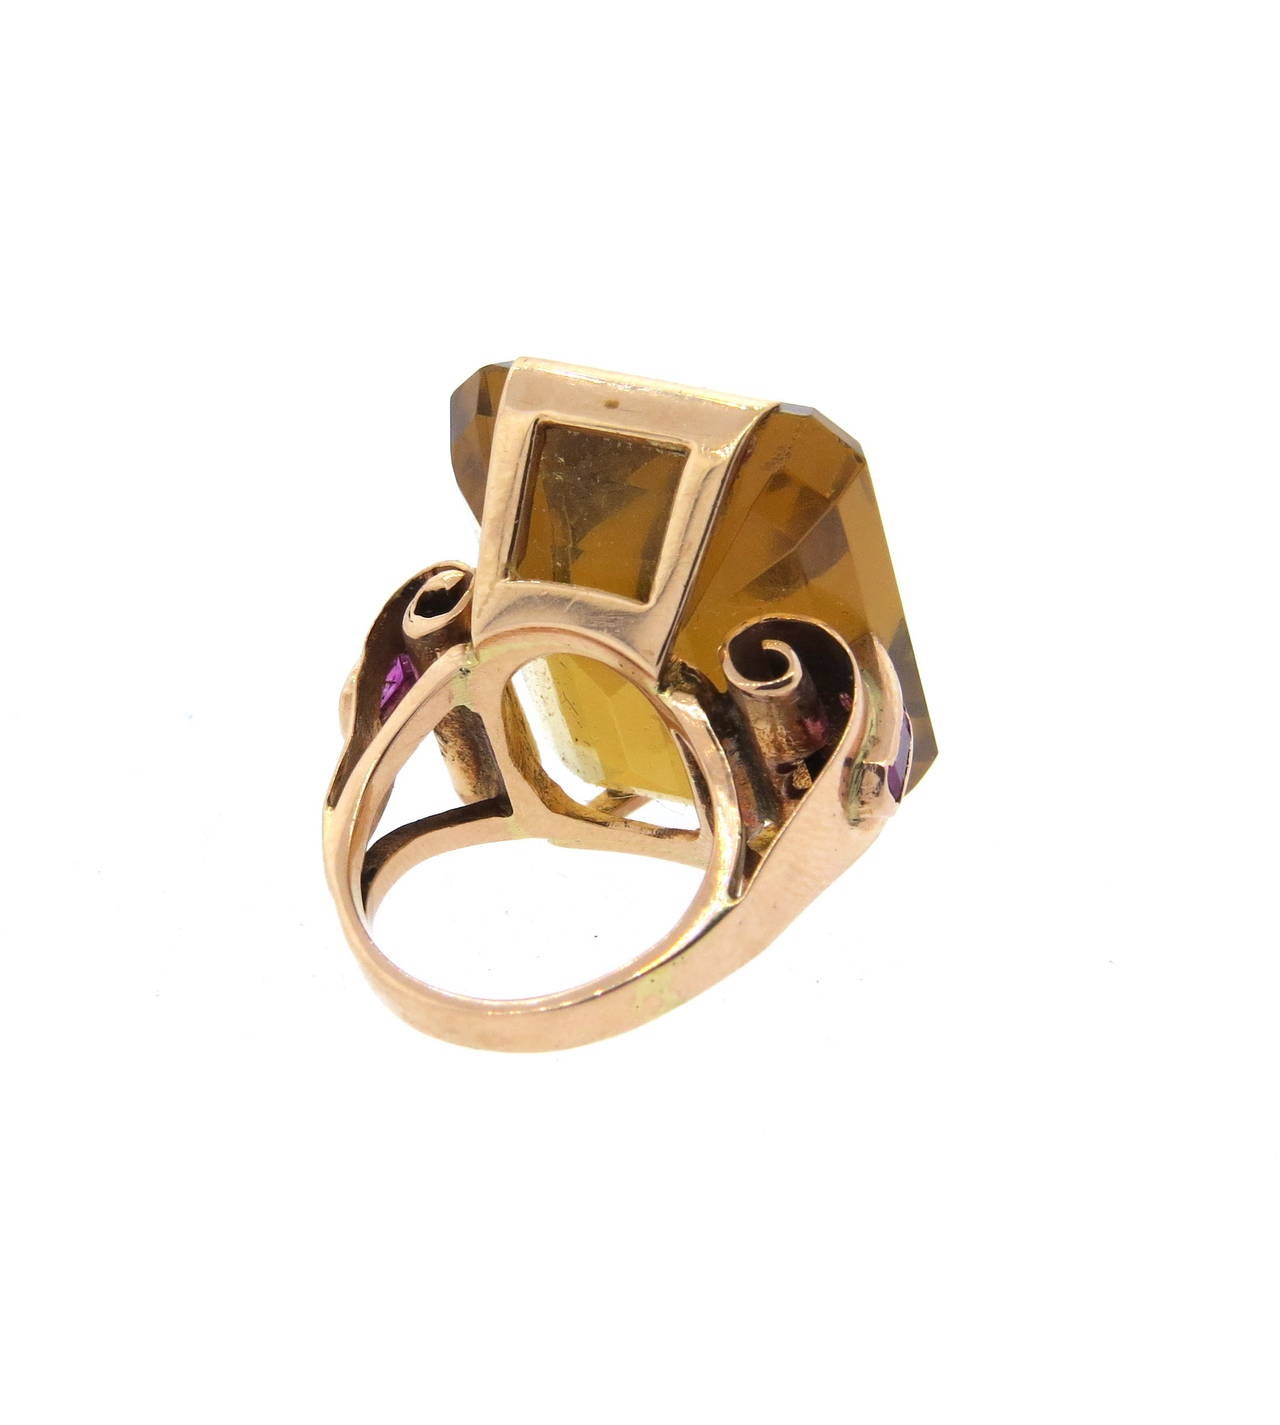 Retro circa 1940s 14k rose gold ring, set with an approx. 39.5-40ct citrine, surrounded with four side rubies. Ring is a size 4 1/4, top of the ring - 25mm x 25mm, sits approx. 12mm from the finger. Weight of the piece - 17.7 grams